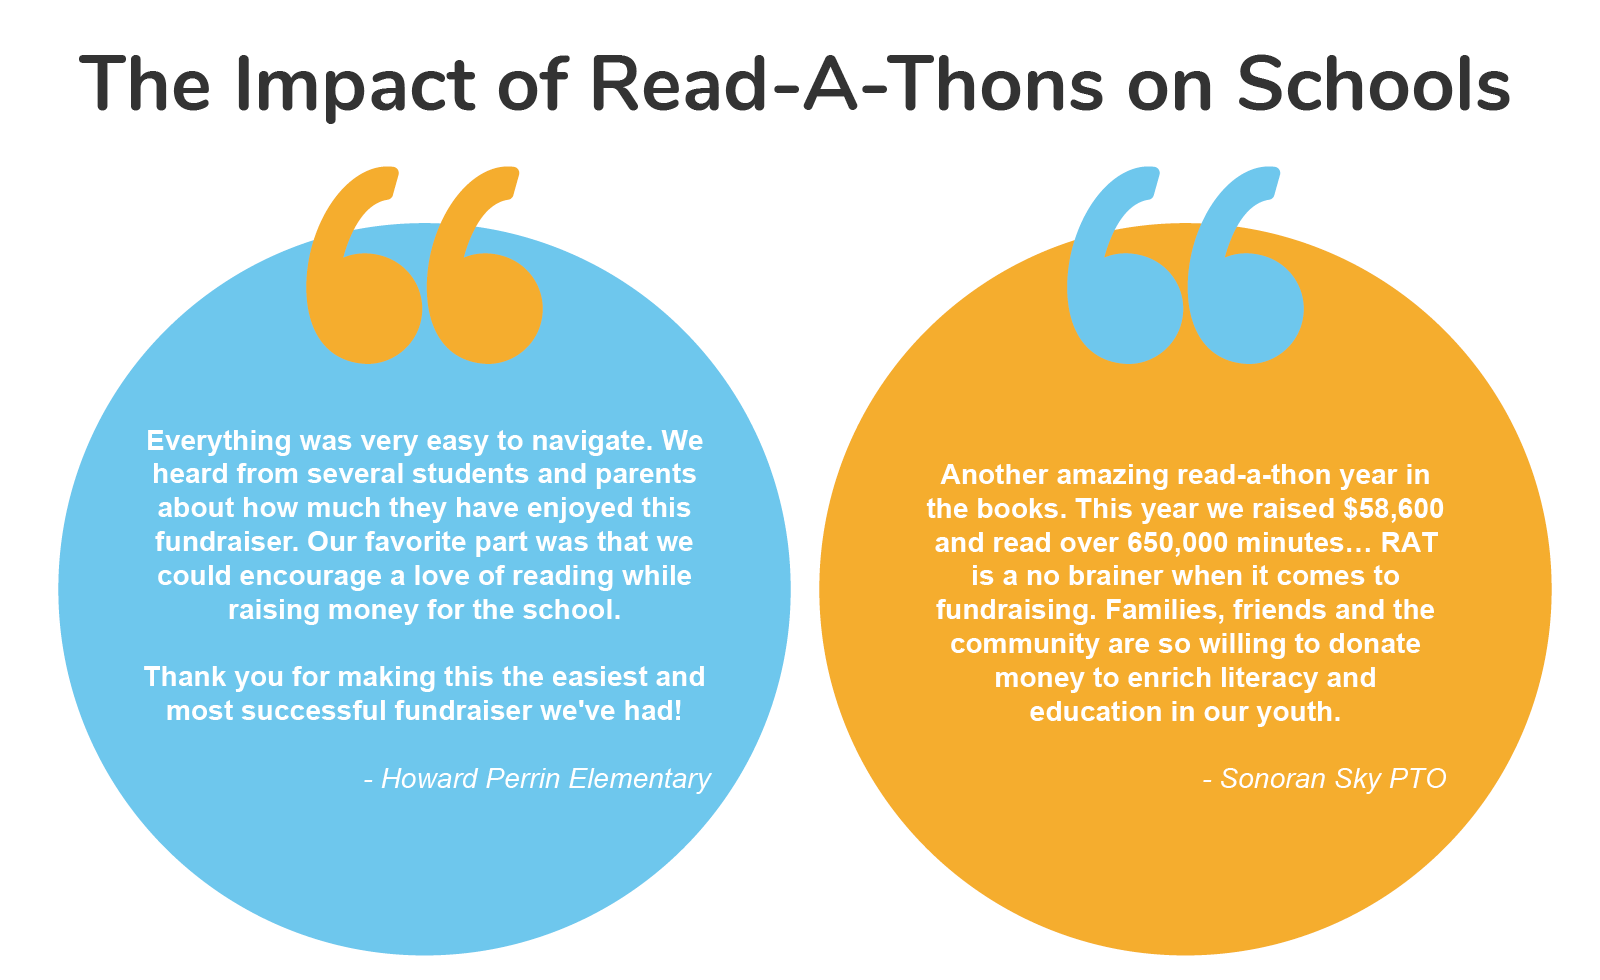 Testimonials from an elementary school and a PTO that love hosting a Read-A-Thon to raise funds and bring their community together.